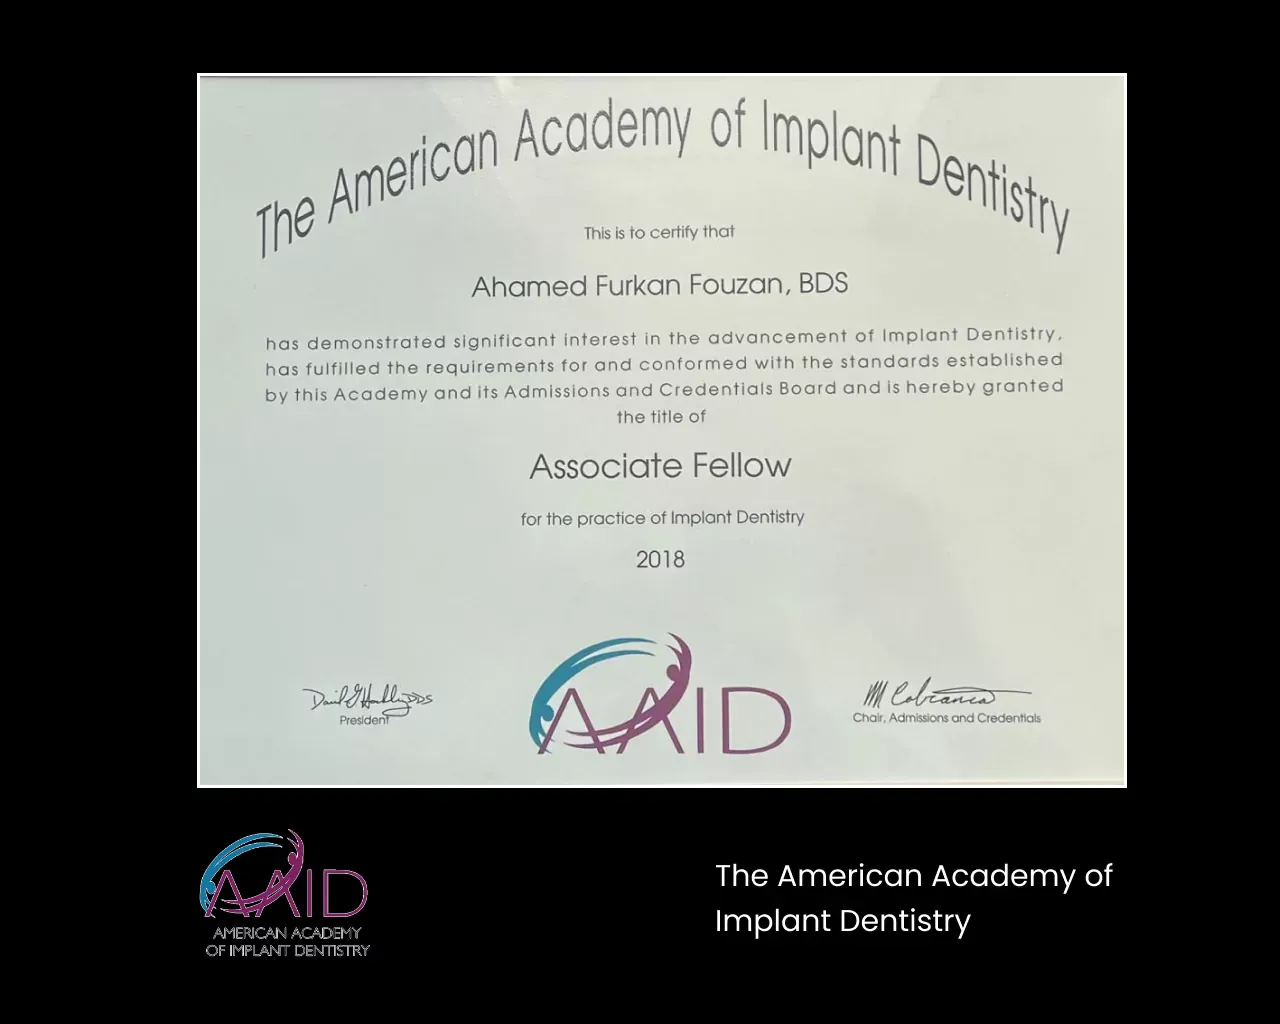 The American Academy of Implant Dentistry